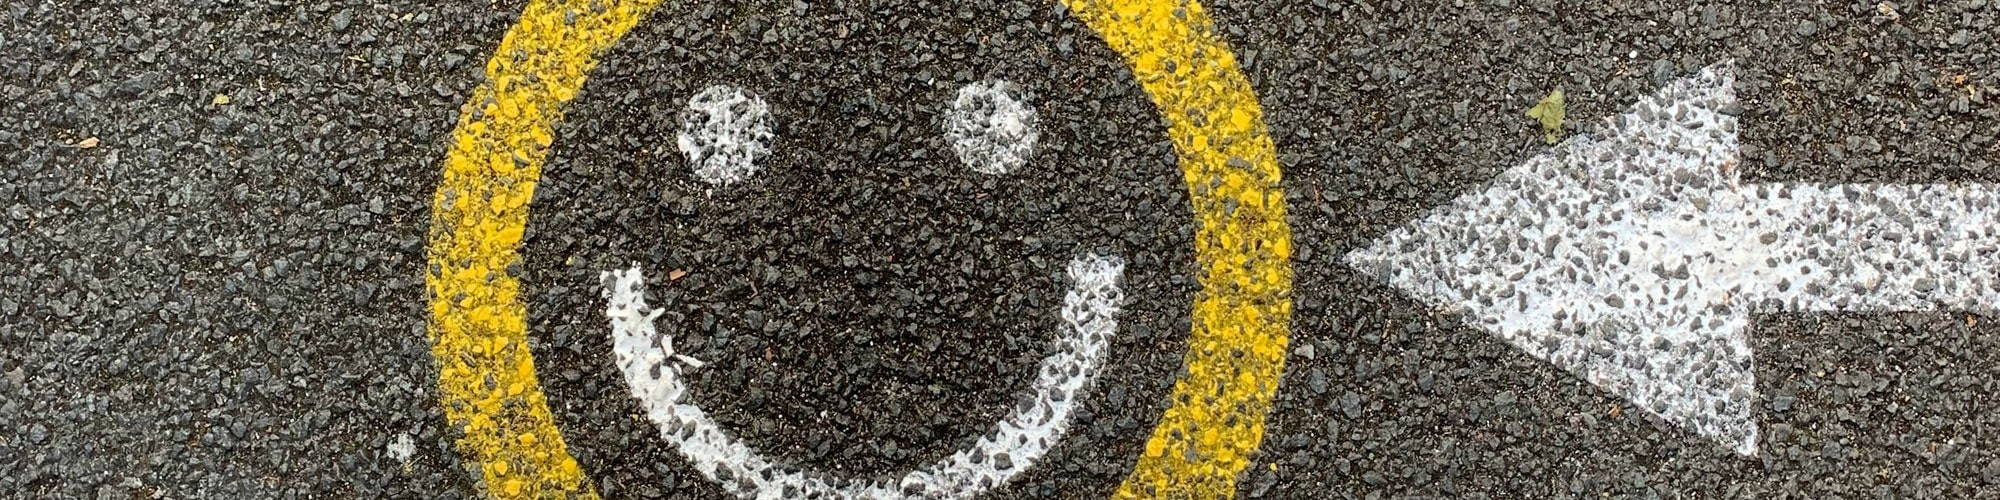 A yellow smiley face drawing on the road